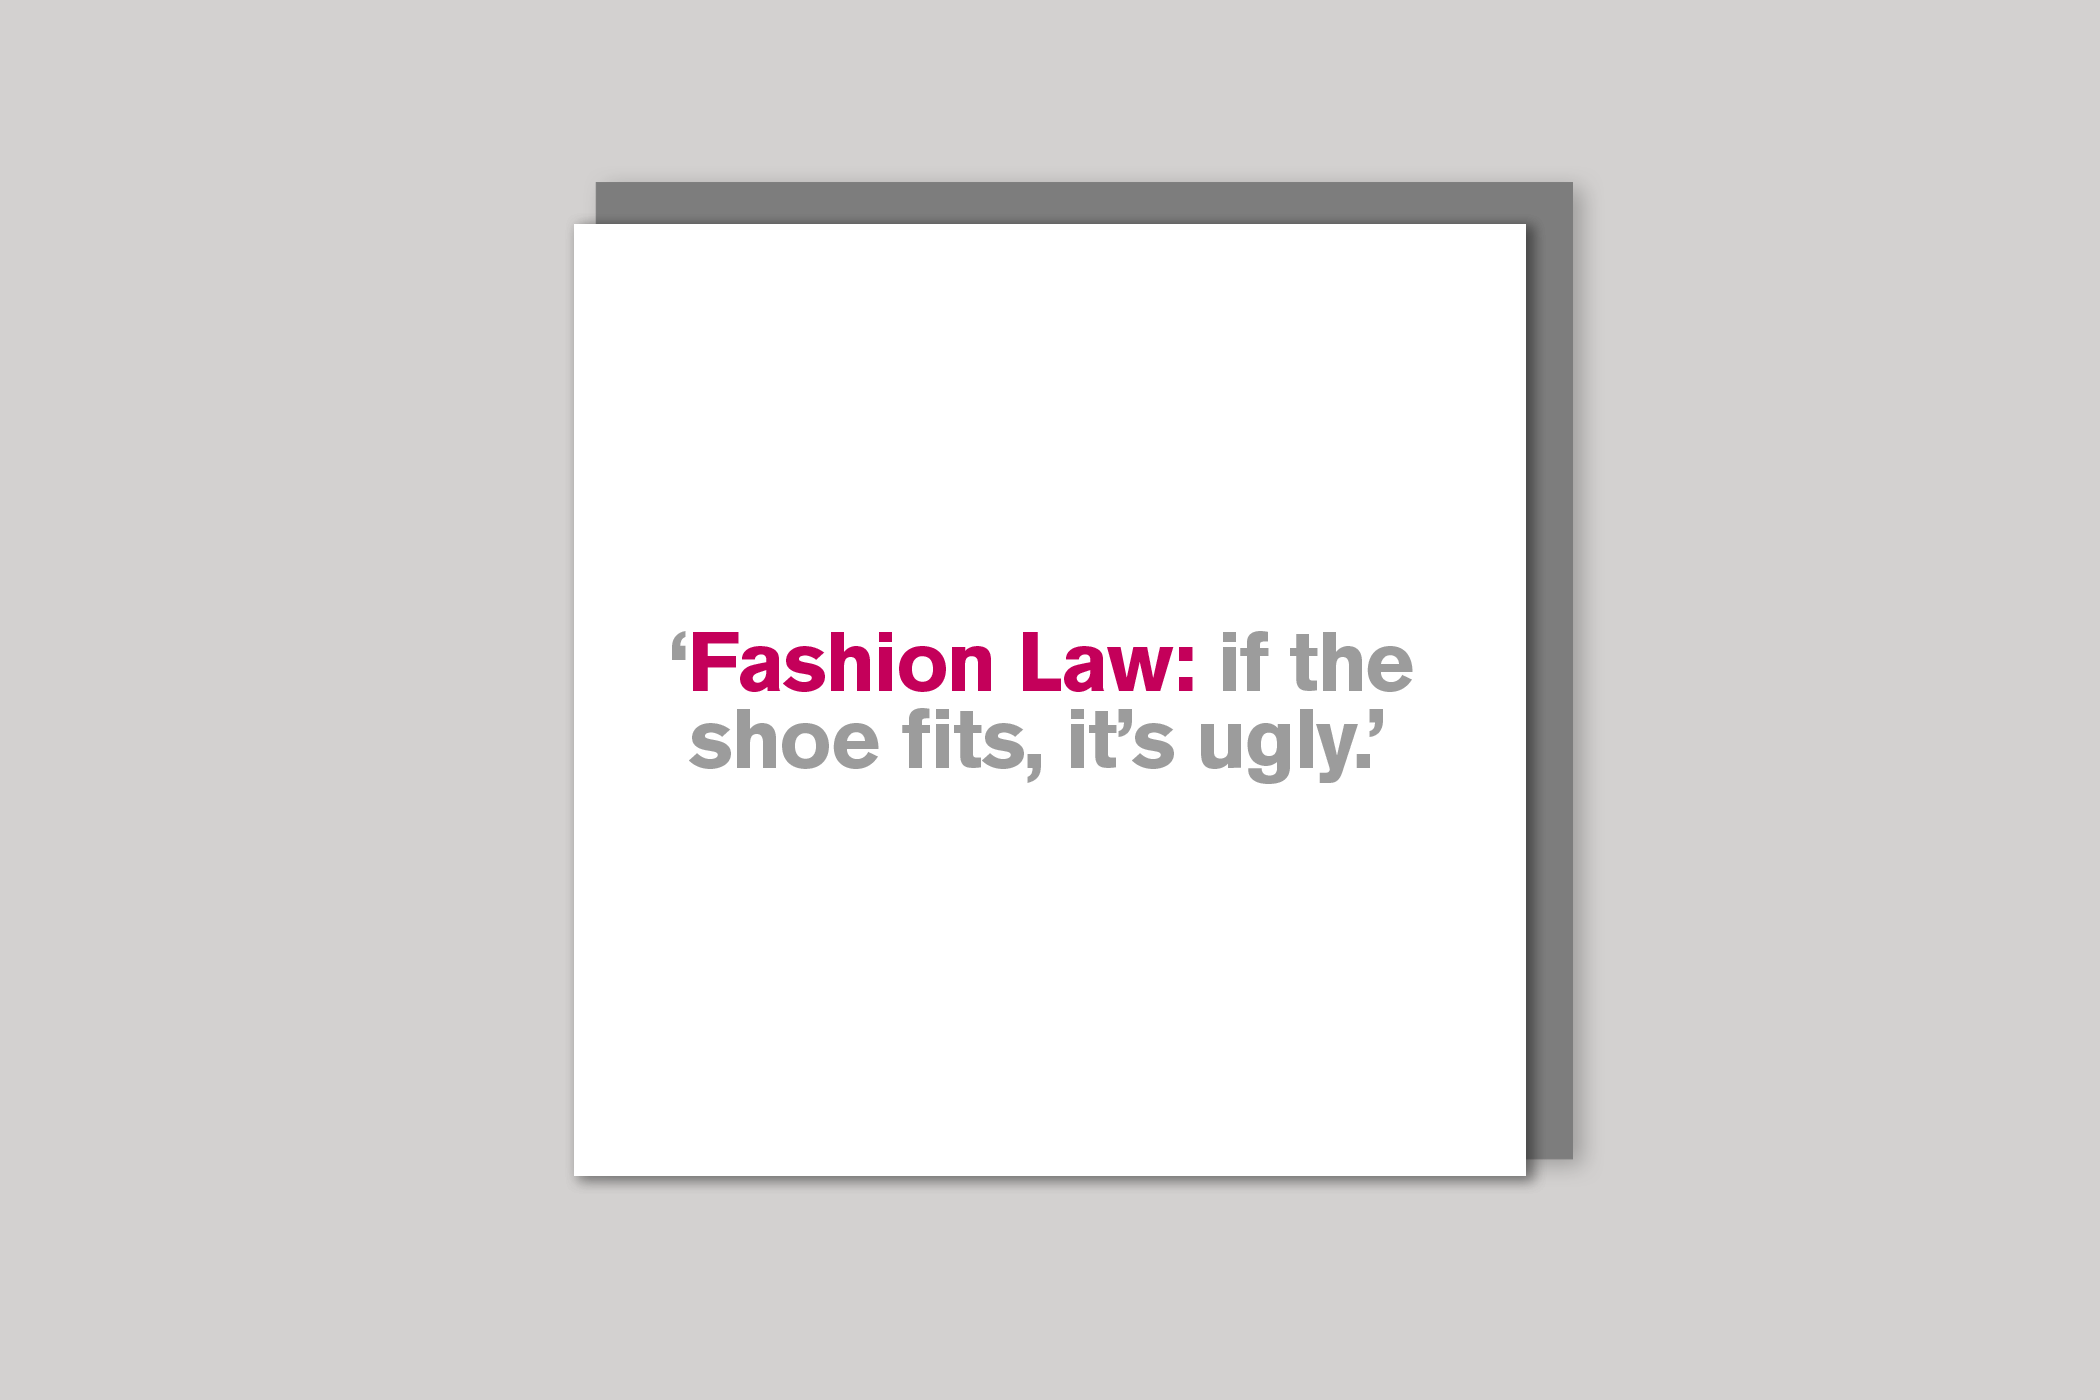 Fashion Law from Lyric range of quotation cards by Icon, back page.